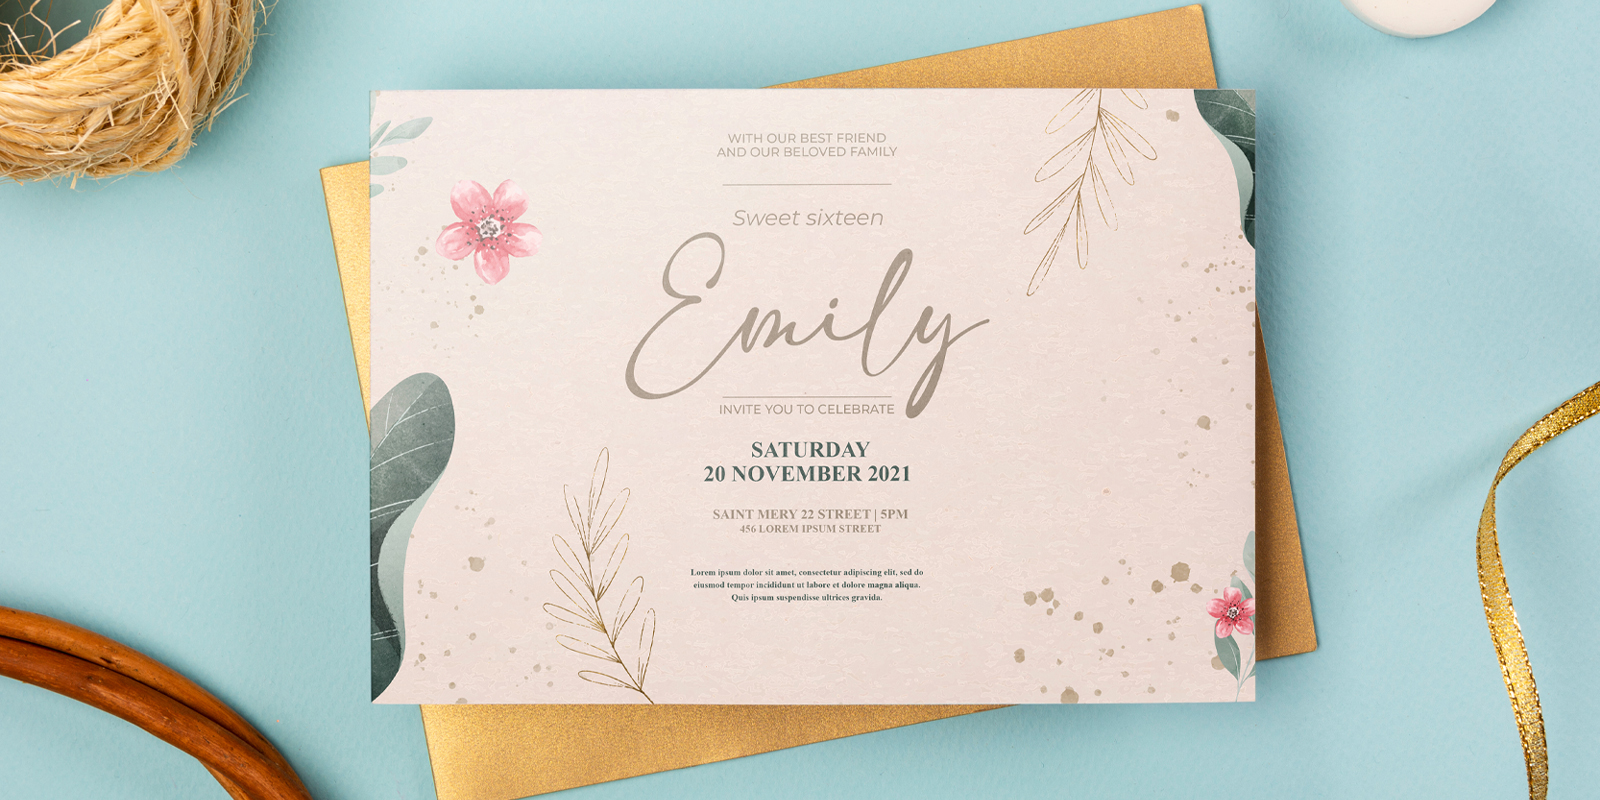 Invitations in Madrid - Print with Pagerr